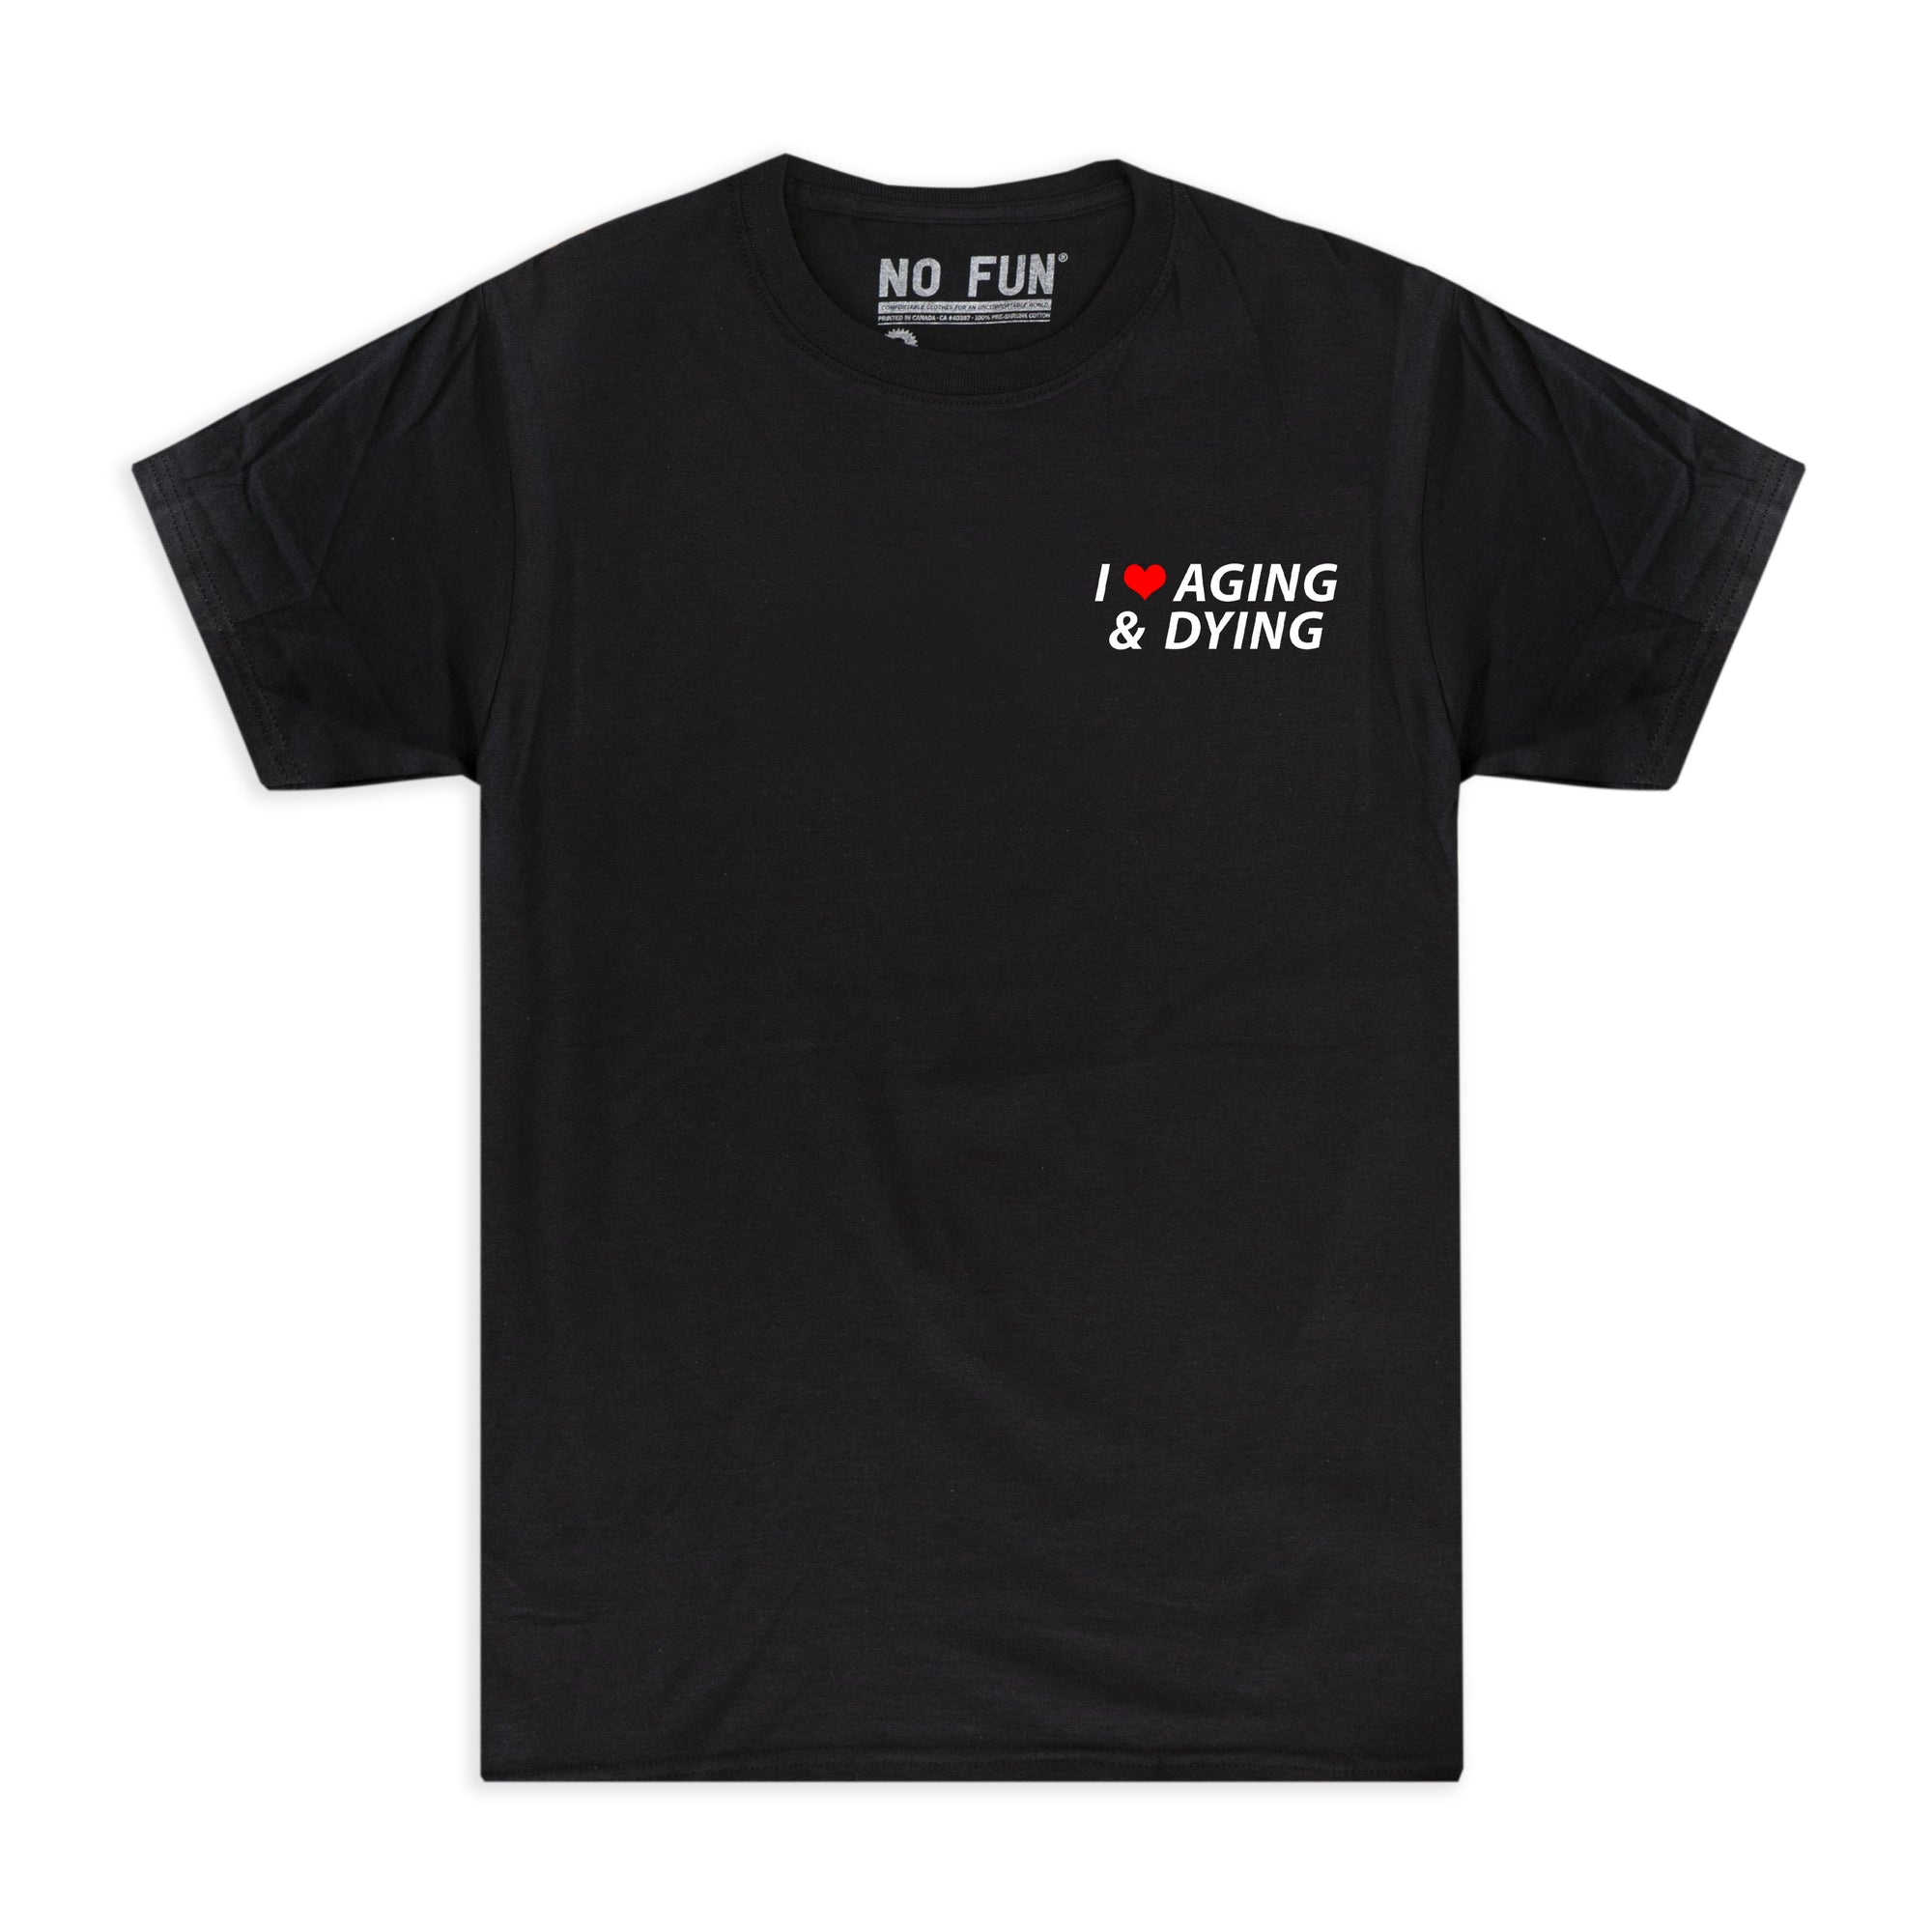 The original "Aging & Dying" T-shirt by No Fun®.  T-shirt is black, and is photographed against a white background.  The left chest print text reads "I ❤️ Aging & Dying" and is located on the front of the T-shirt.   The text is white, with a red heart.